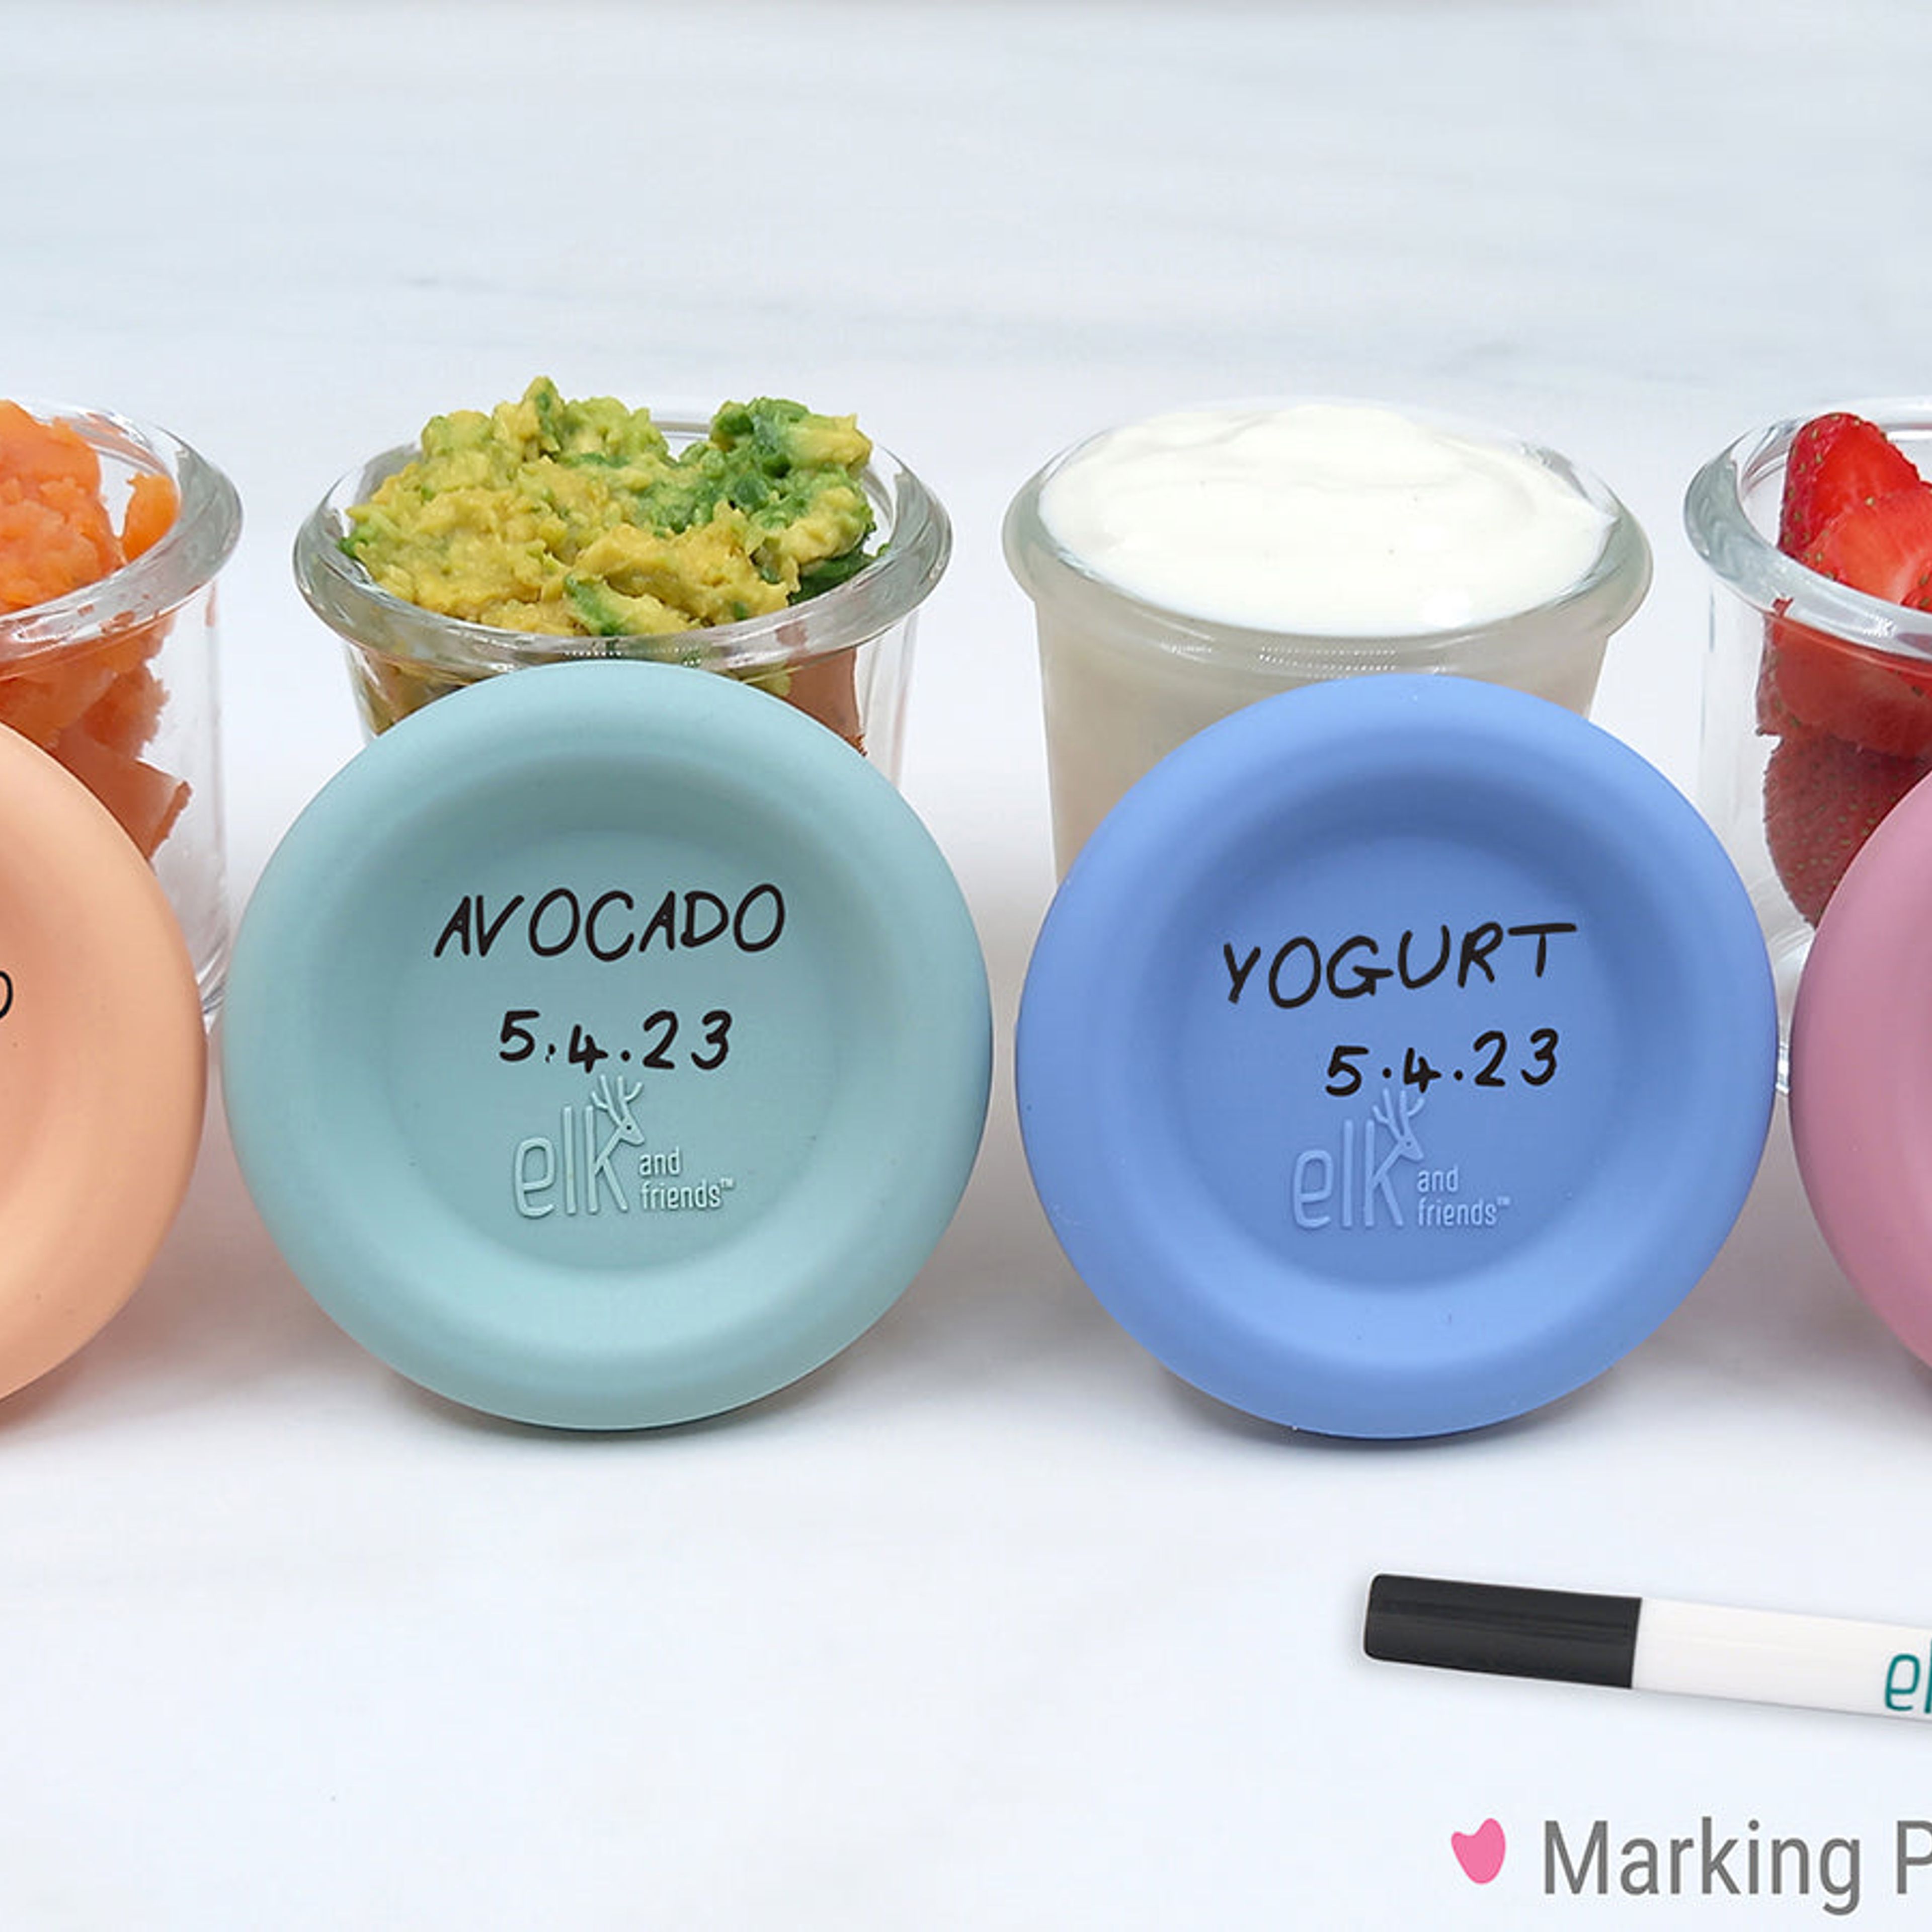 4oz Glass Baby Food Storage Jars | Food Grade Silicone Lids | Set of 12 | Neutral Colors